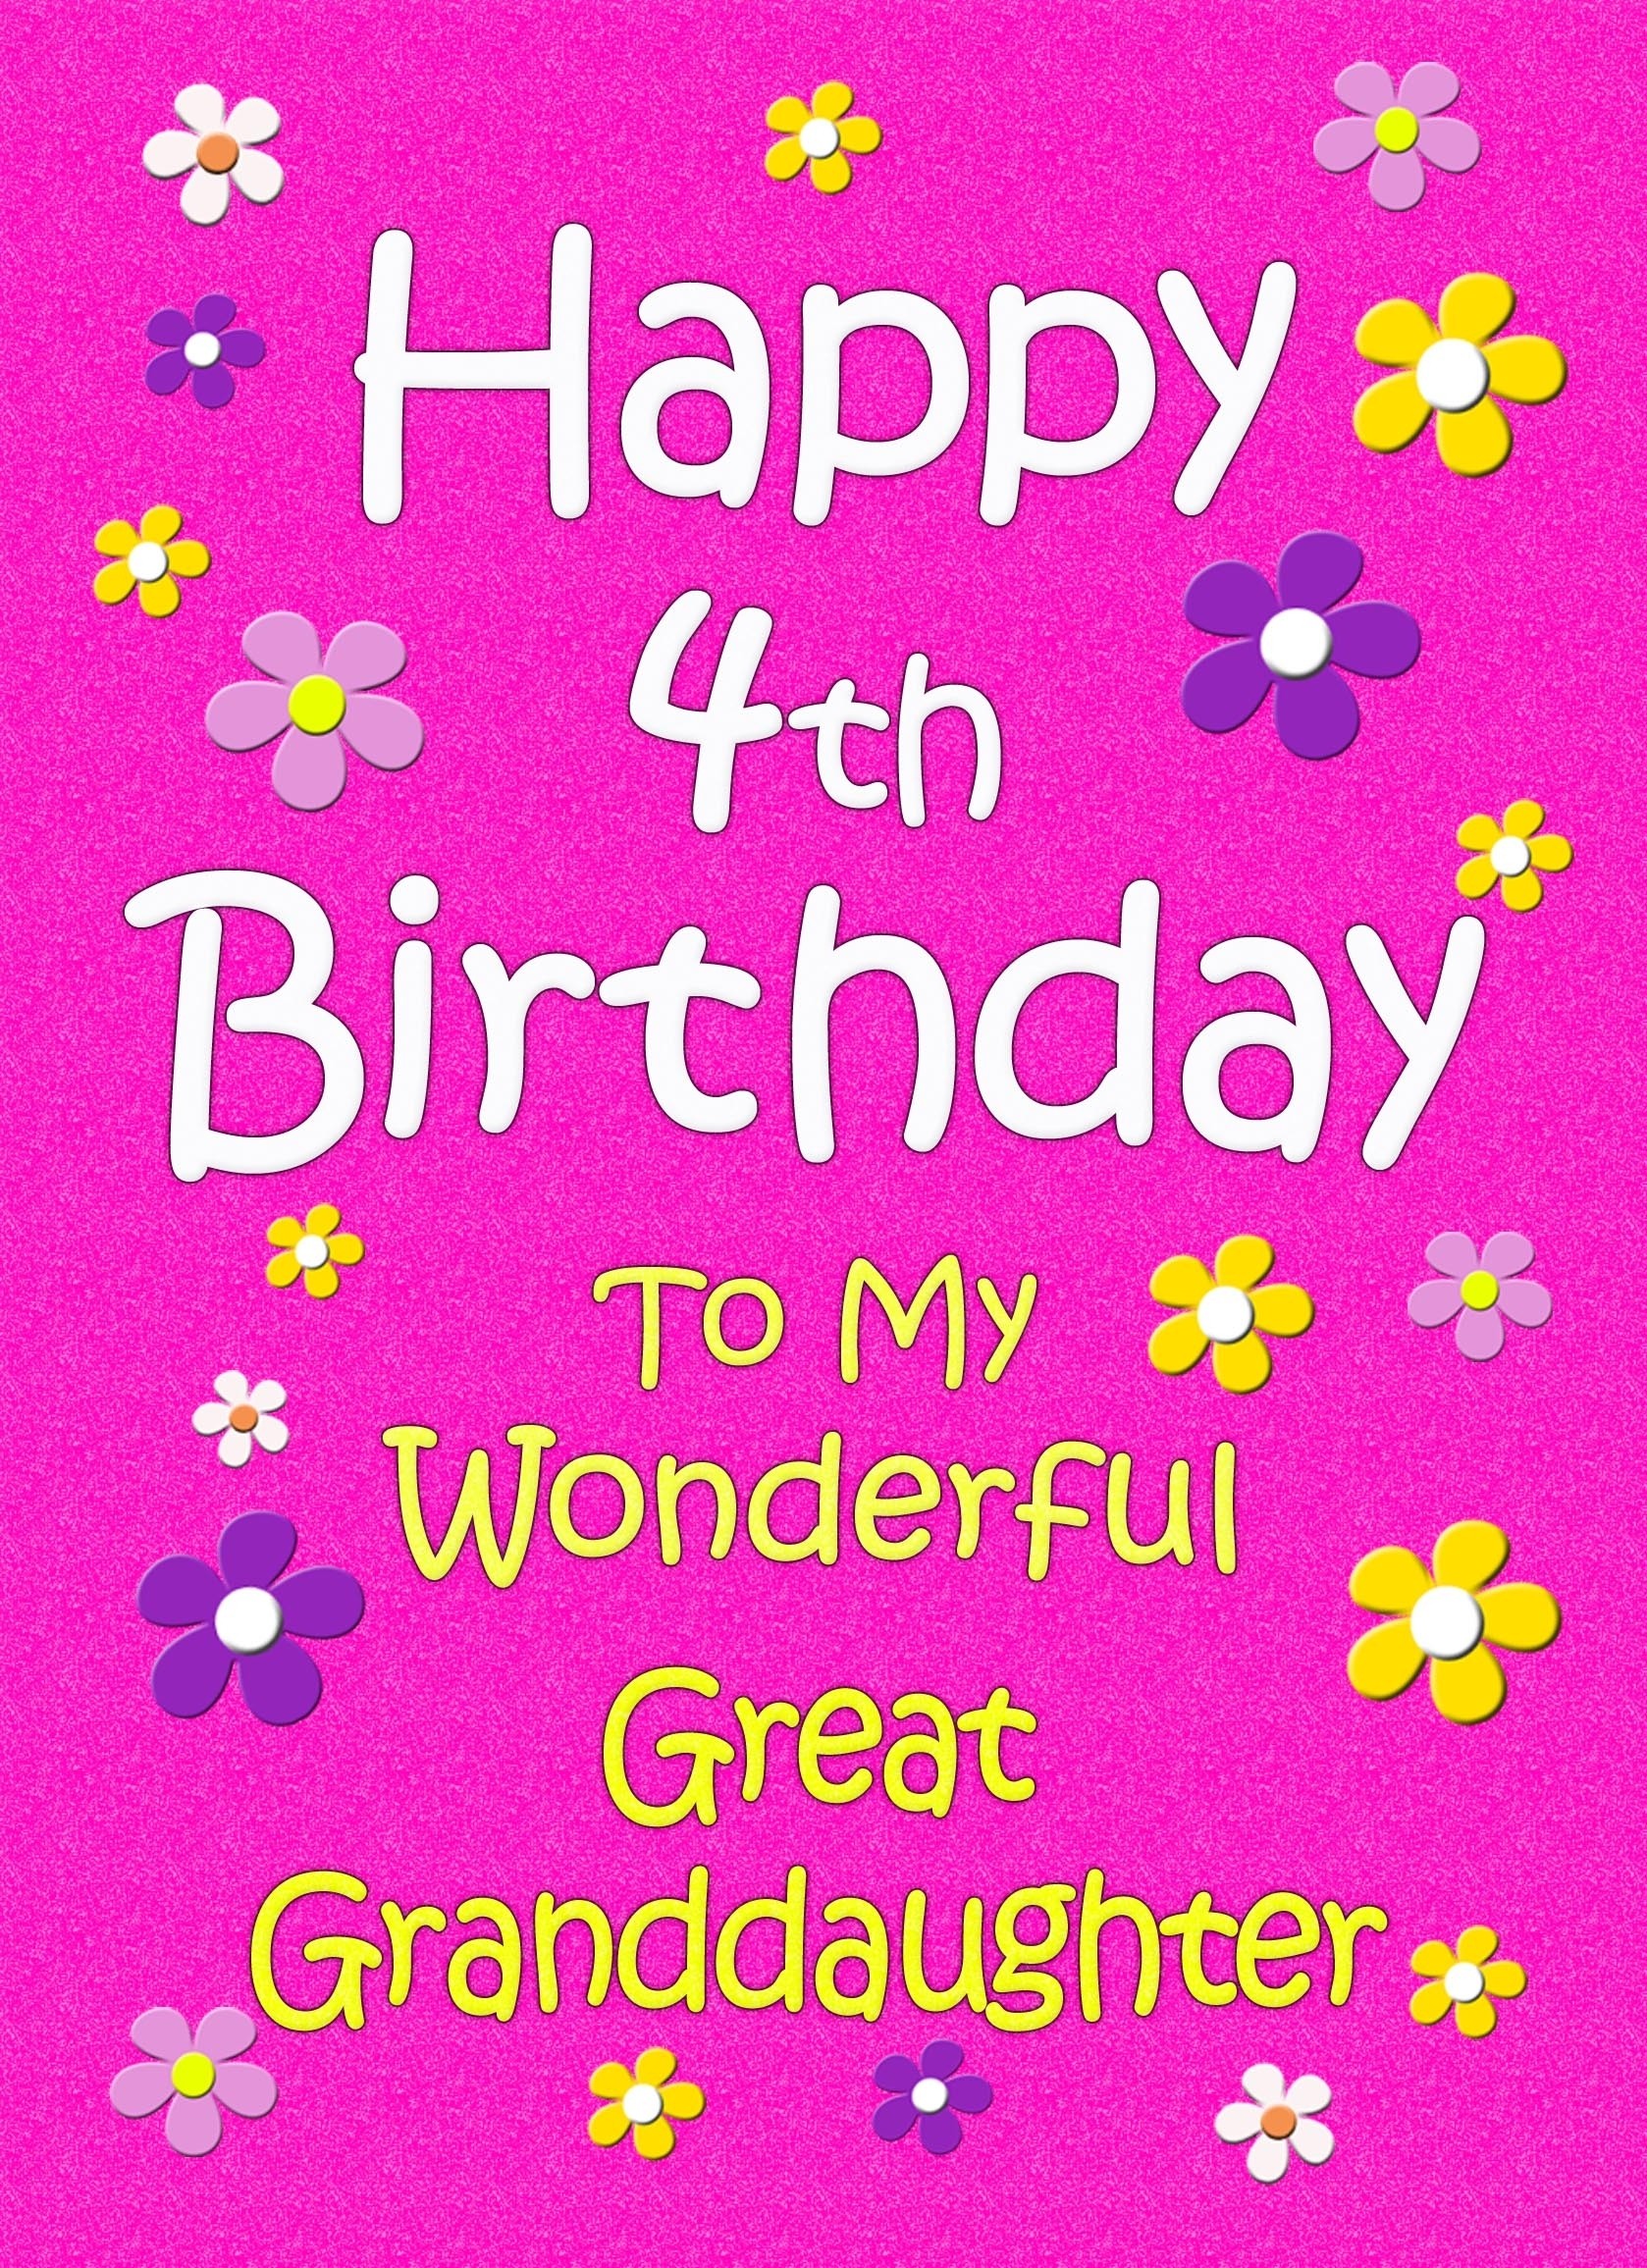 Great Granddaughter 4th Birthday Card (Pink)